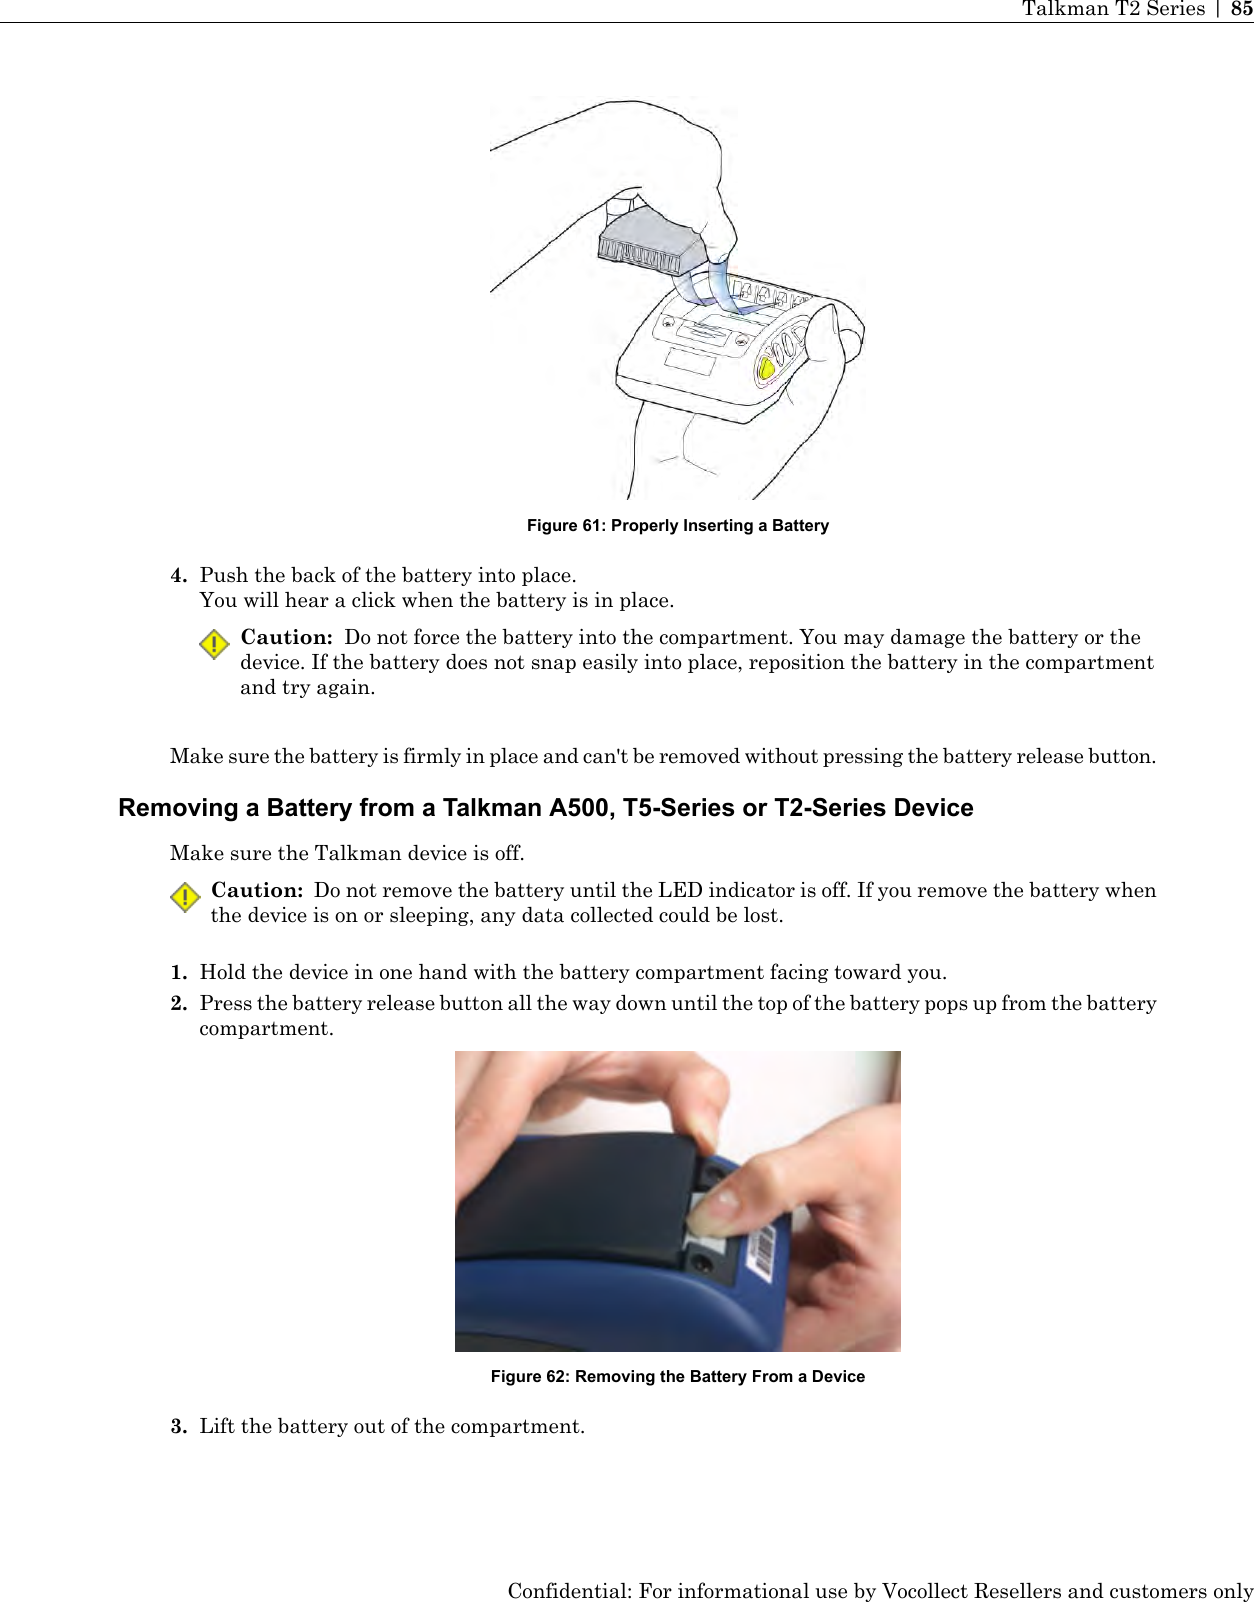 Figure 61: Properly Inserting a Battery4. Push the back of the battery into place.You will hear a click when the battery is in place.Caution: Do not force the battery into the compartment. You may damage the battery or thedevice. If the battery does not snap easily into place, reposition the battery in the compartmentand try again.Make sure the battery is firmly in place and can&apos;t be removed without pressing the battery release button.Removing a Battery from a Talkman A500, T5-Series or T2-Series DeviceMake sure the Talkman device is off.Caution: Do not remove the battery until the LED indicator is off. If you remove the battery whenthe device is on or sleeping, any data collected could be lost.1. Hold the device in one hand with the battery compartment facing toward you.2. Press the battery release button all the way down until the top of the battery pops up from the batterycompartment.Figure 62: Removing the Battery From a Device3. Lift the battery out of the compartment.Confidential: For informational use by Vocollect Resellers and customers onlyTalkman T2 Series | 85